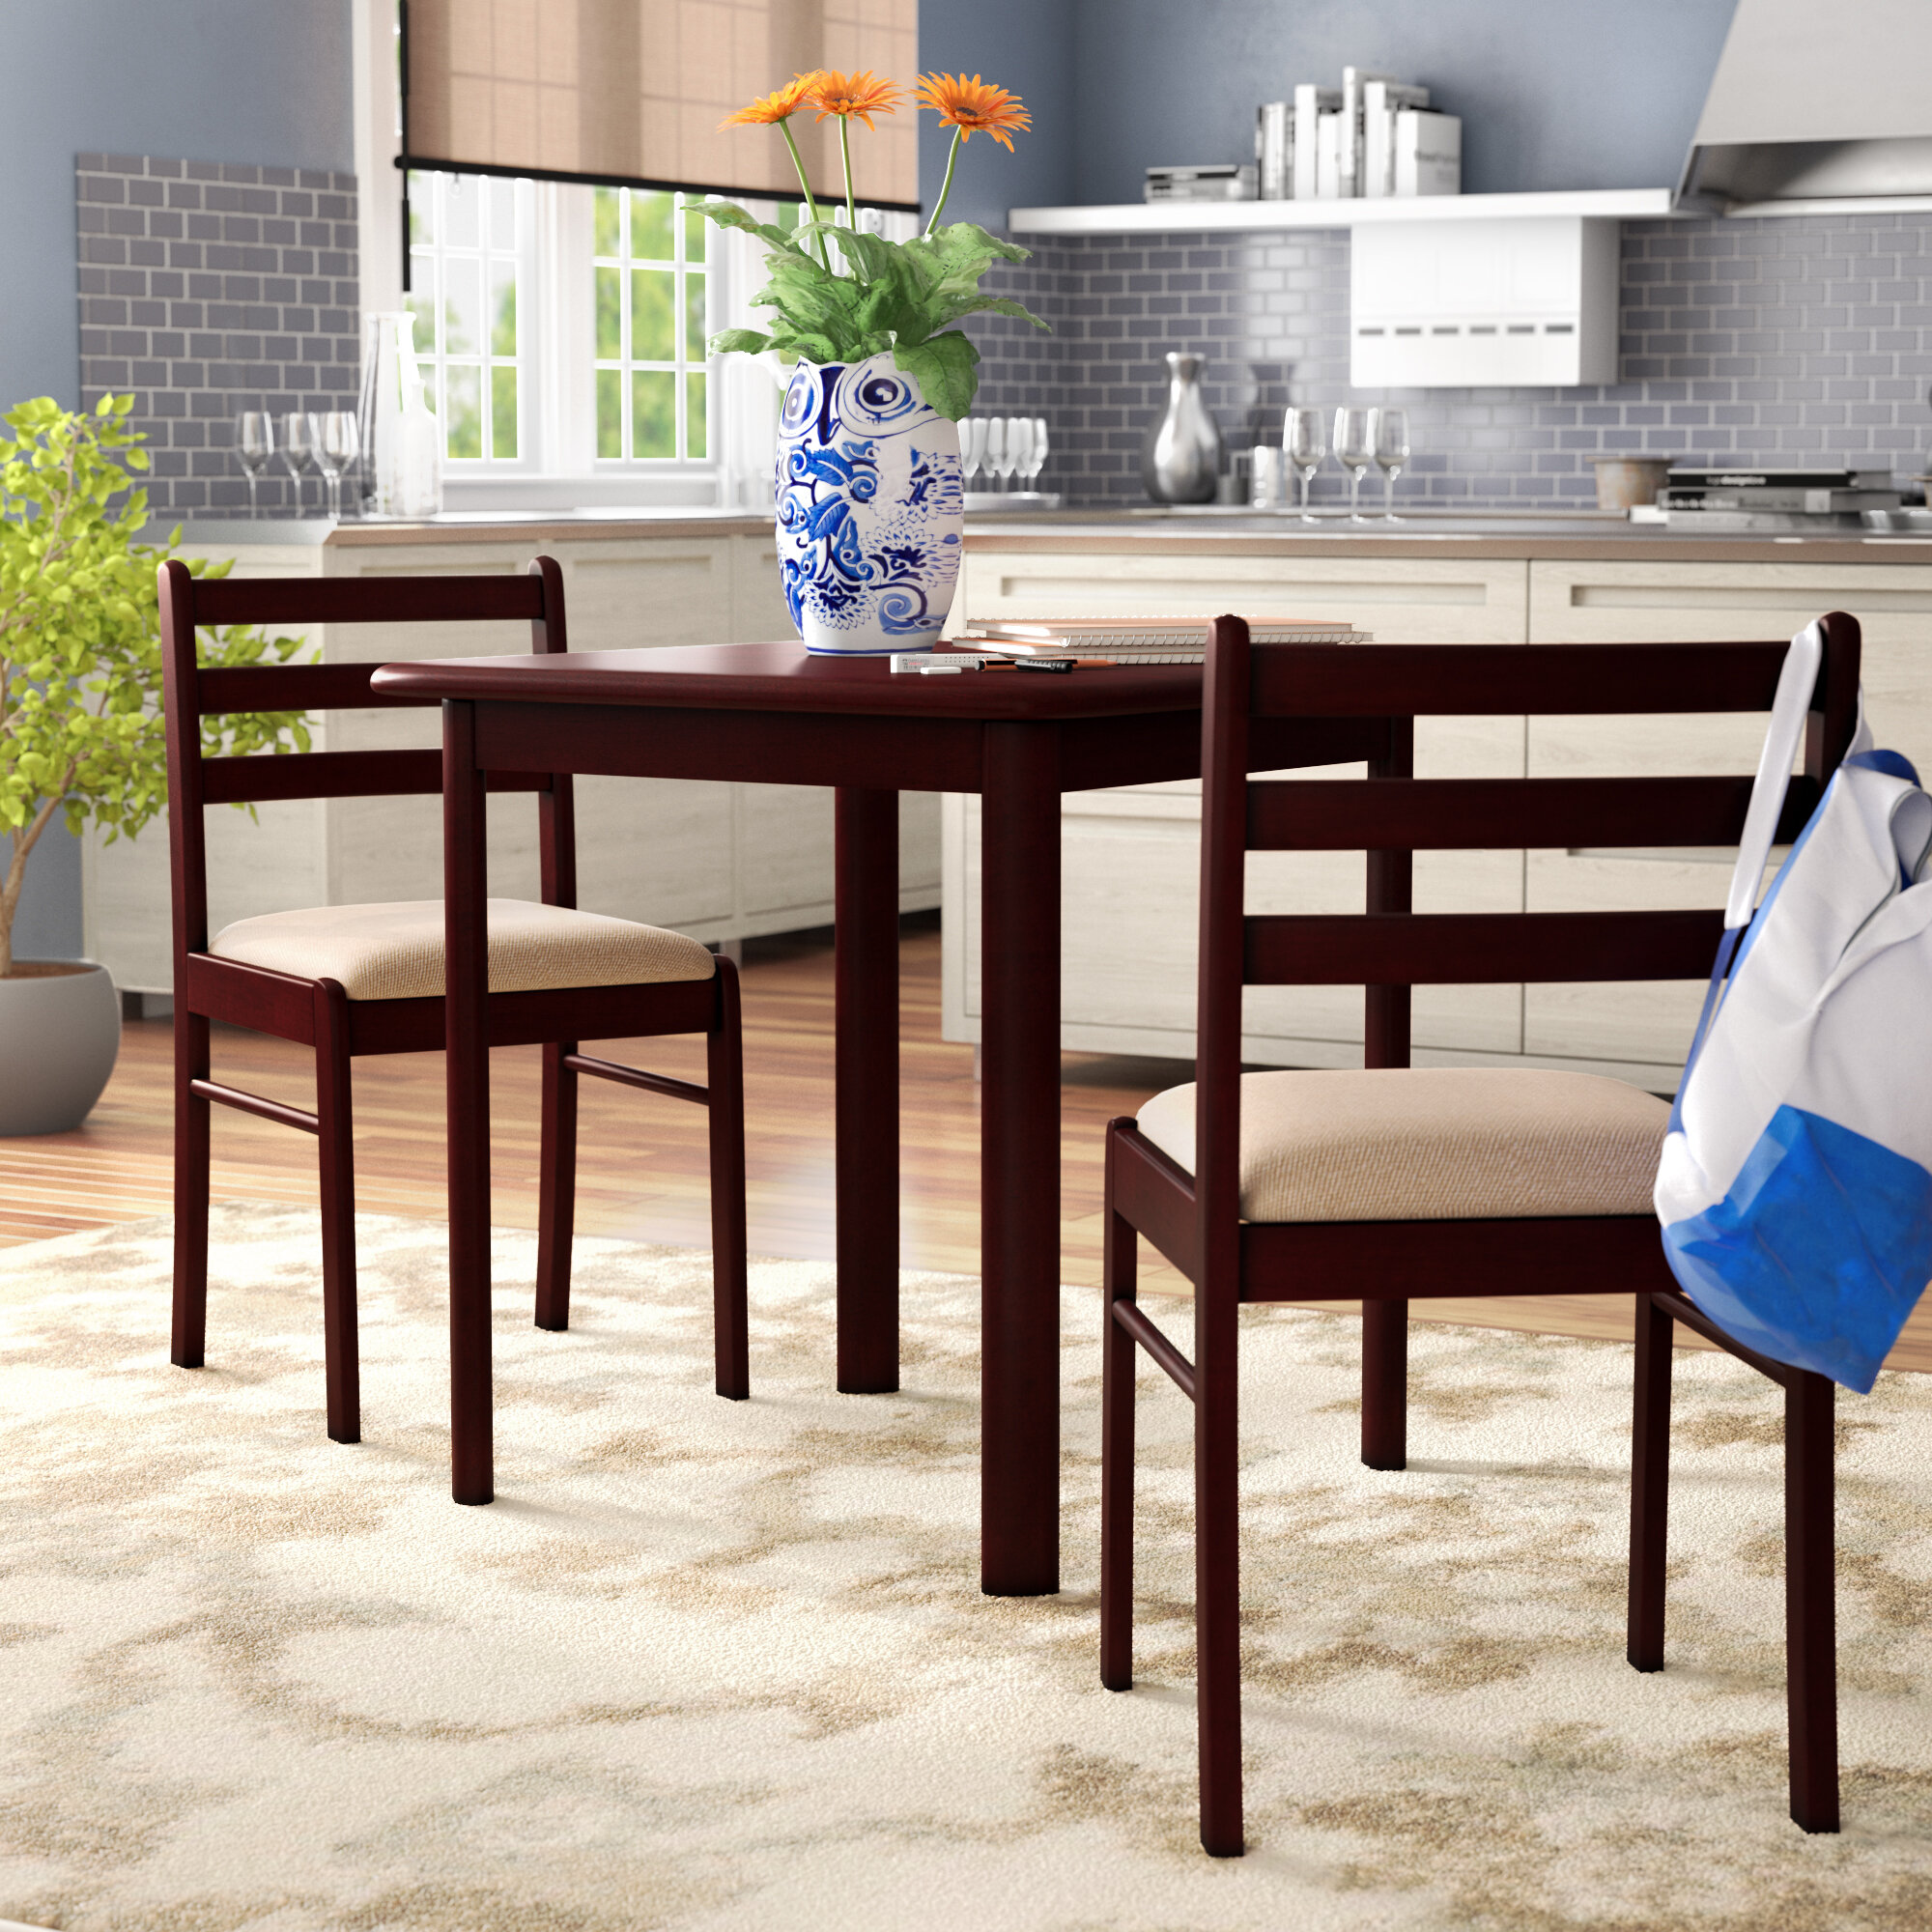 Bistro Set Table Chairs Small Kitchen Dining Room Breakfast Nook Apartment Compa Home Garden Edemia Furniture